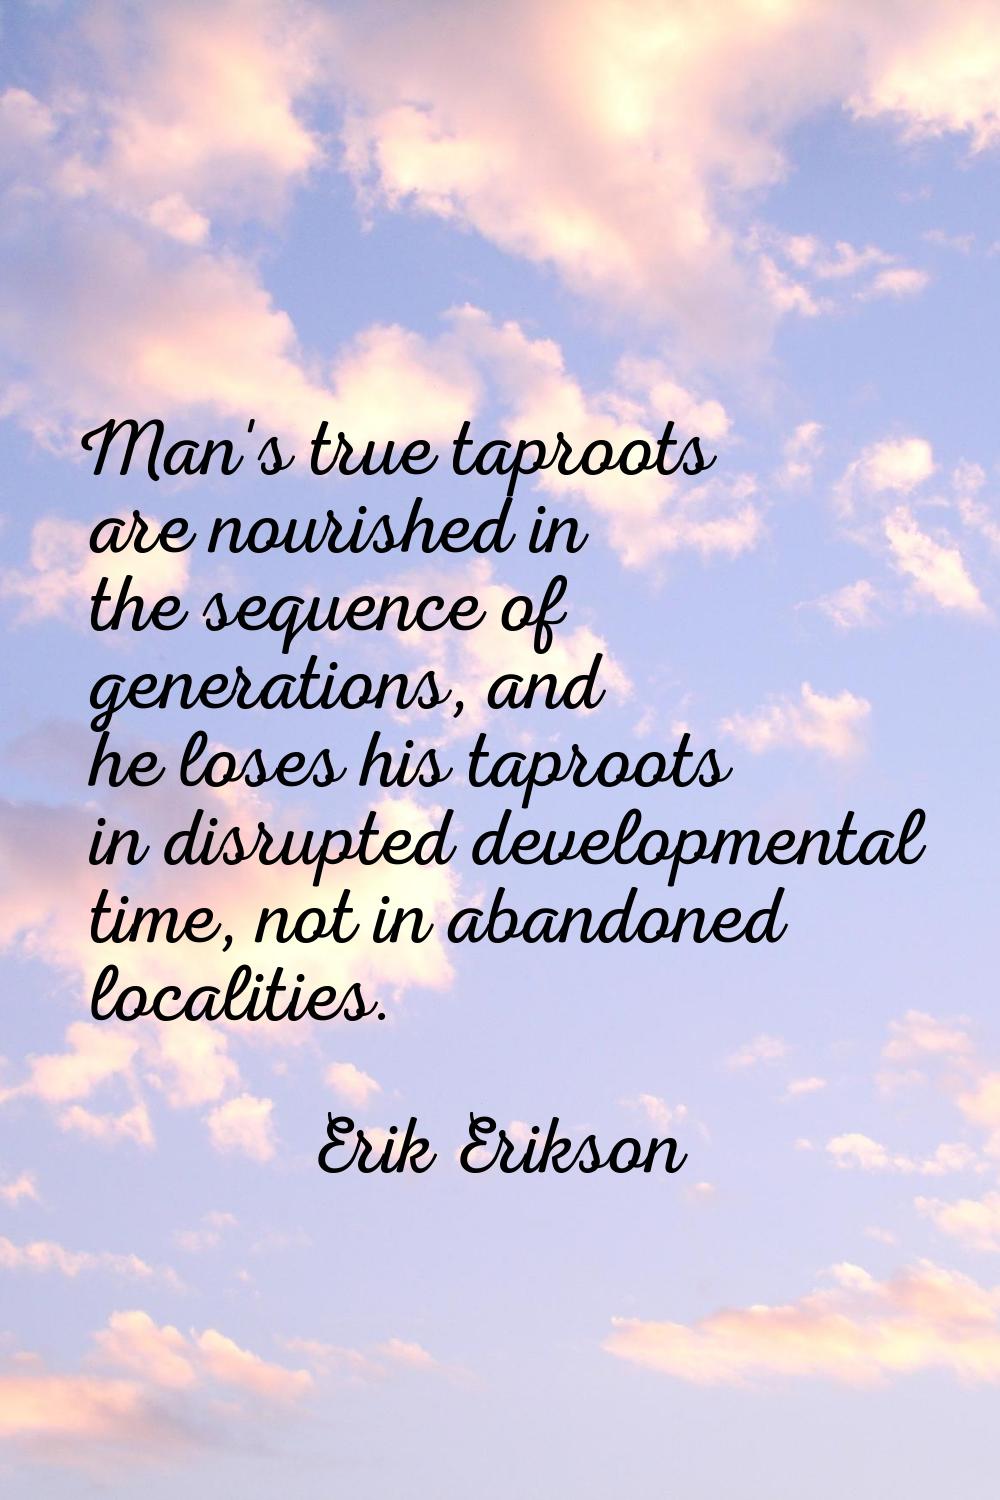 Man's true taproots are nourished in the sequence of generations, and he loses his taproots in disr